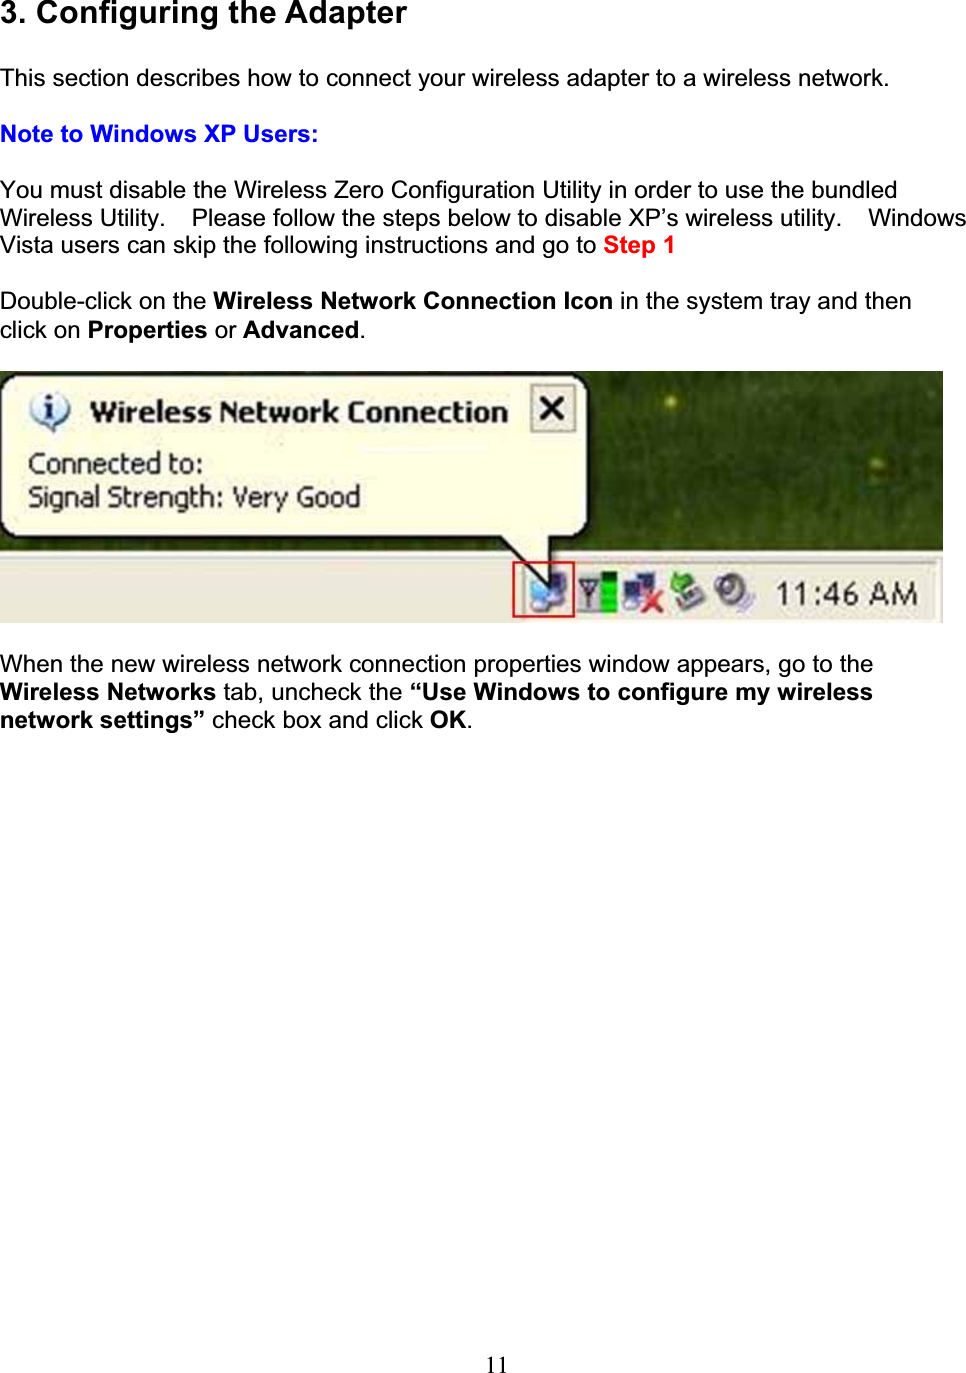 113. Configuring the AdapterThis section describes how to connect your wireless adapter to a wireless network.Note to Windows XP Users:You must disable the Wireless Zero Configuration Utility in order to use the bundled Wireless Utility.  Please follow the steps below to disable XP’s wireless utility. Windows Vista users can skip the following instructions and go to Step 1Double-click on the Wireless Network Connection Icon in the system tray and then click on Properties or Advanced.When the new wireless network connection properties window appears, go to theWireless Networks tab, uncheck the “Use Windows to configure my wirelessnetwork settings” check box and click OK.